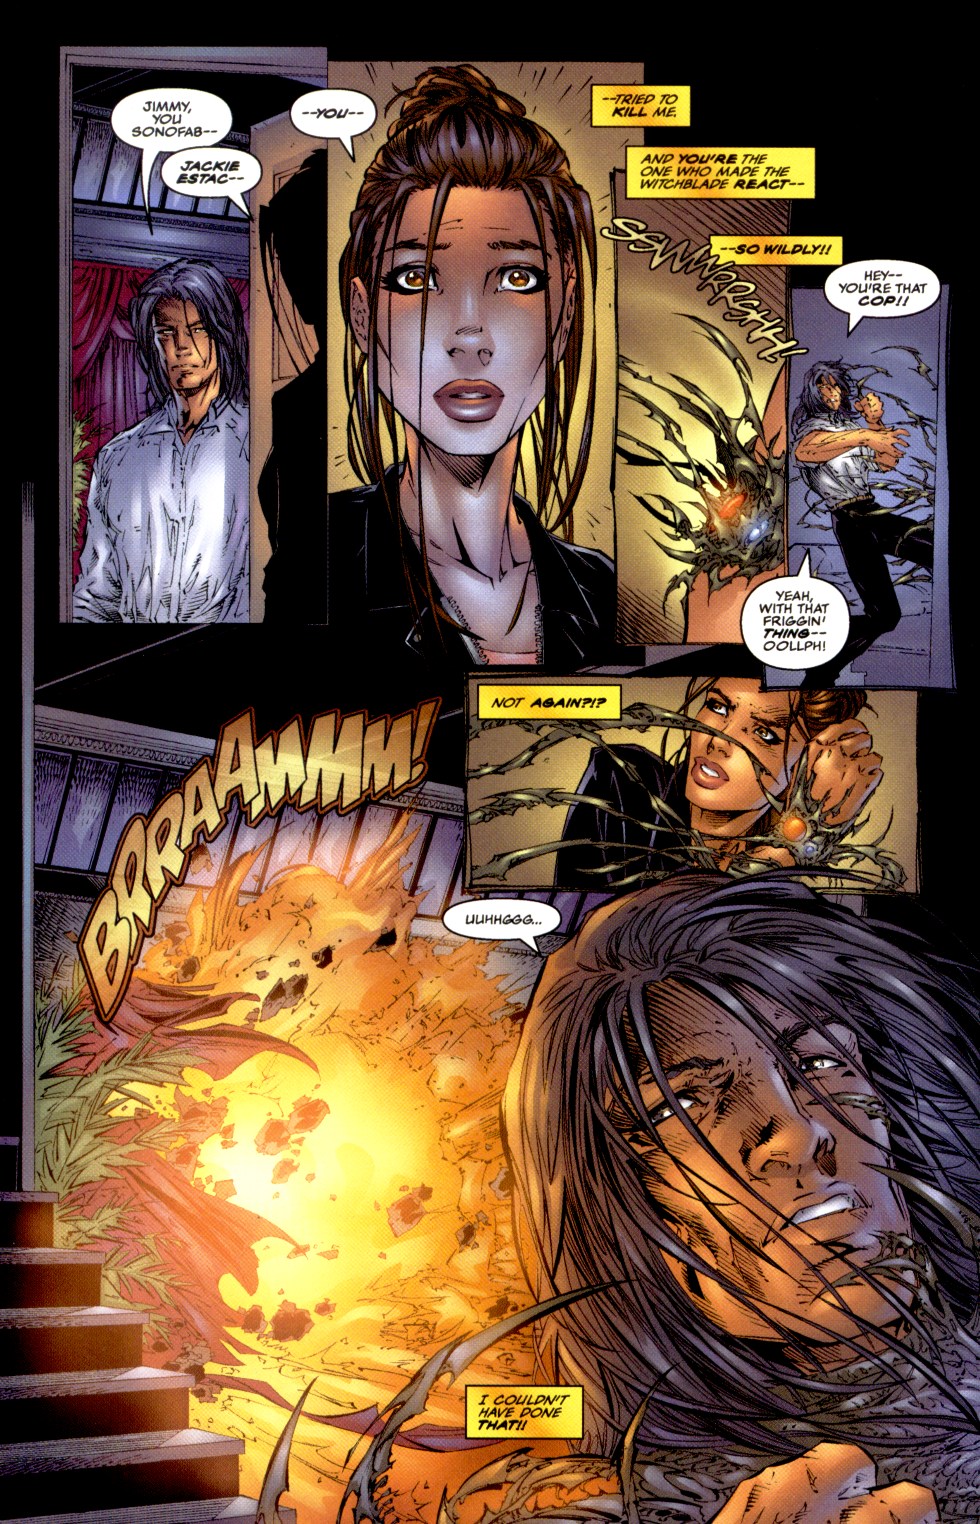 Witchblade #18 - Family Ties Part 1 - Continued From The Darkness #8 